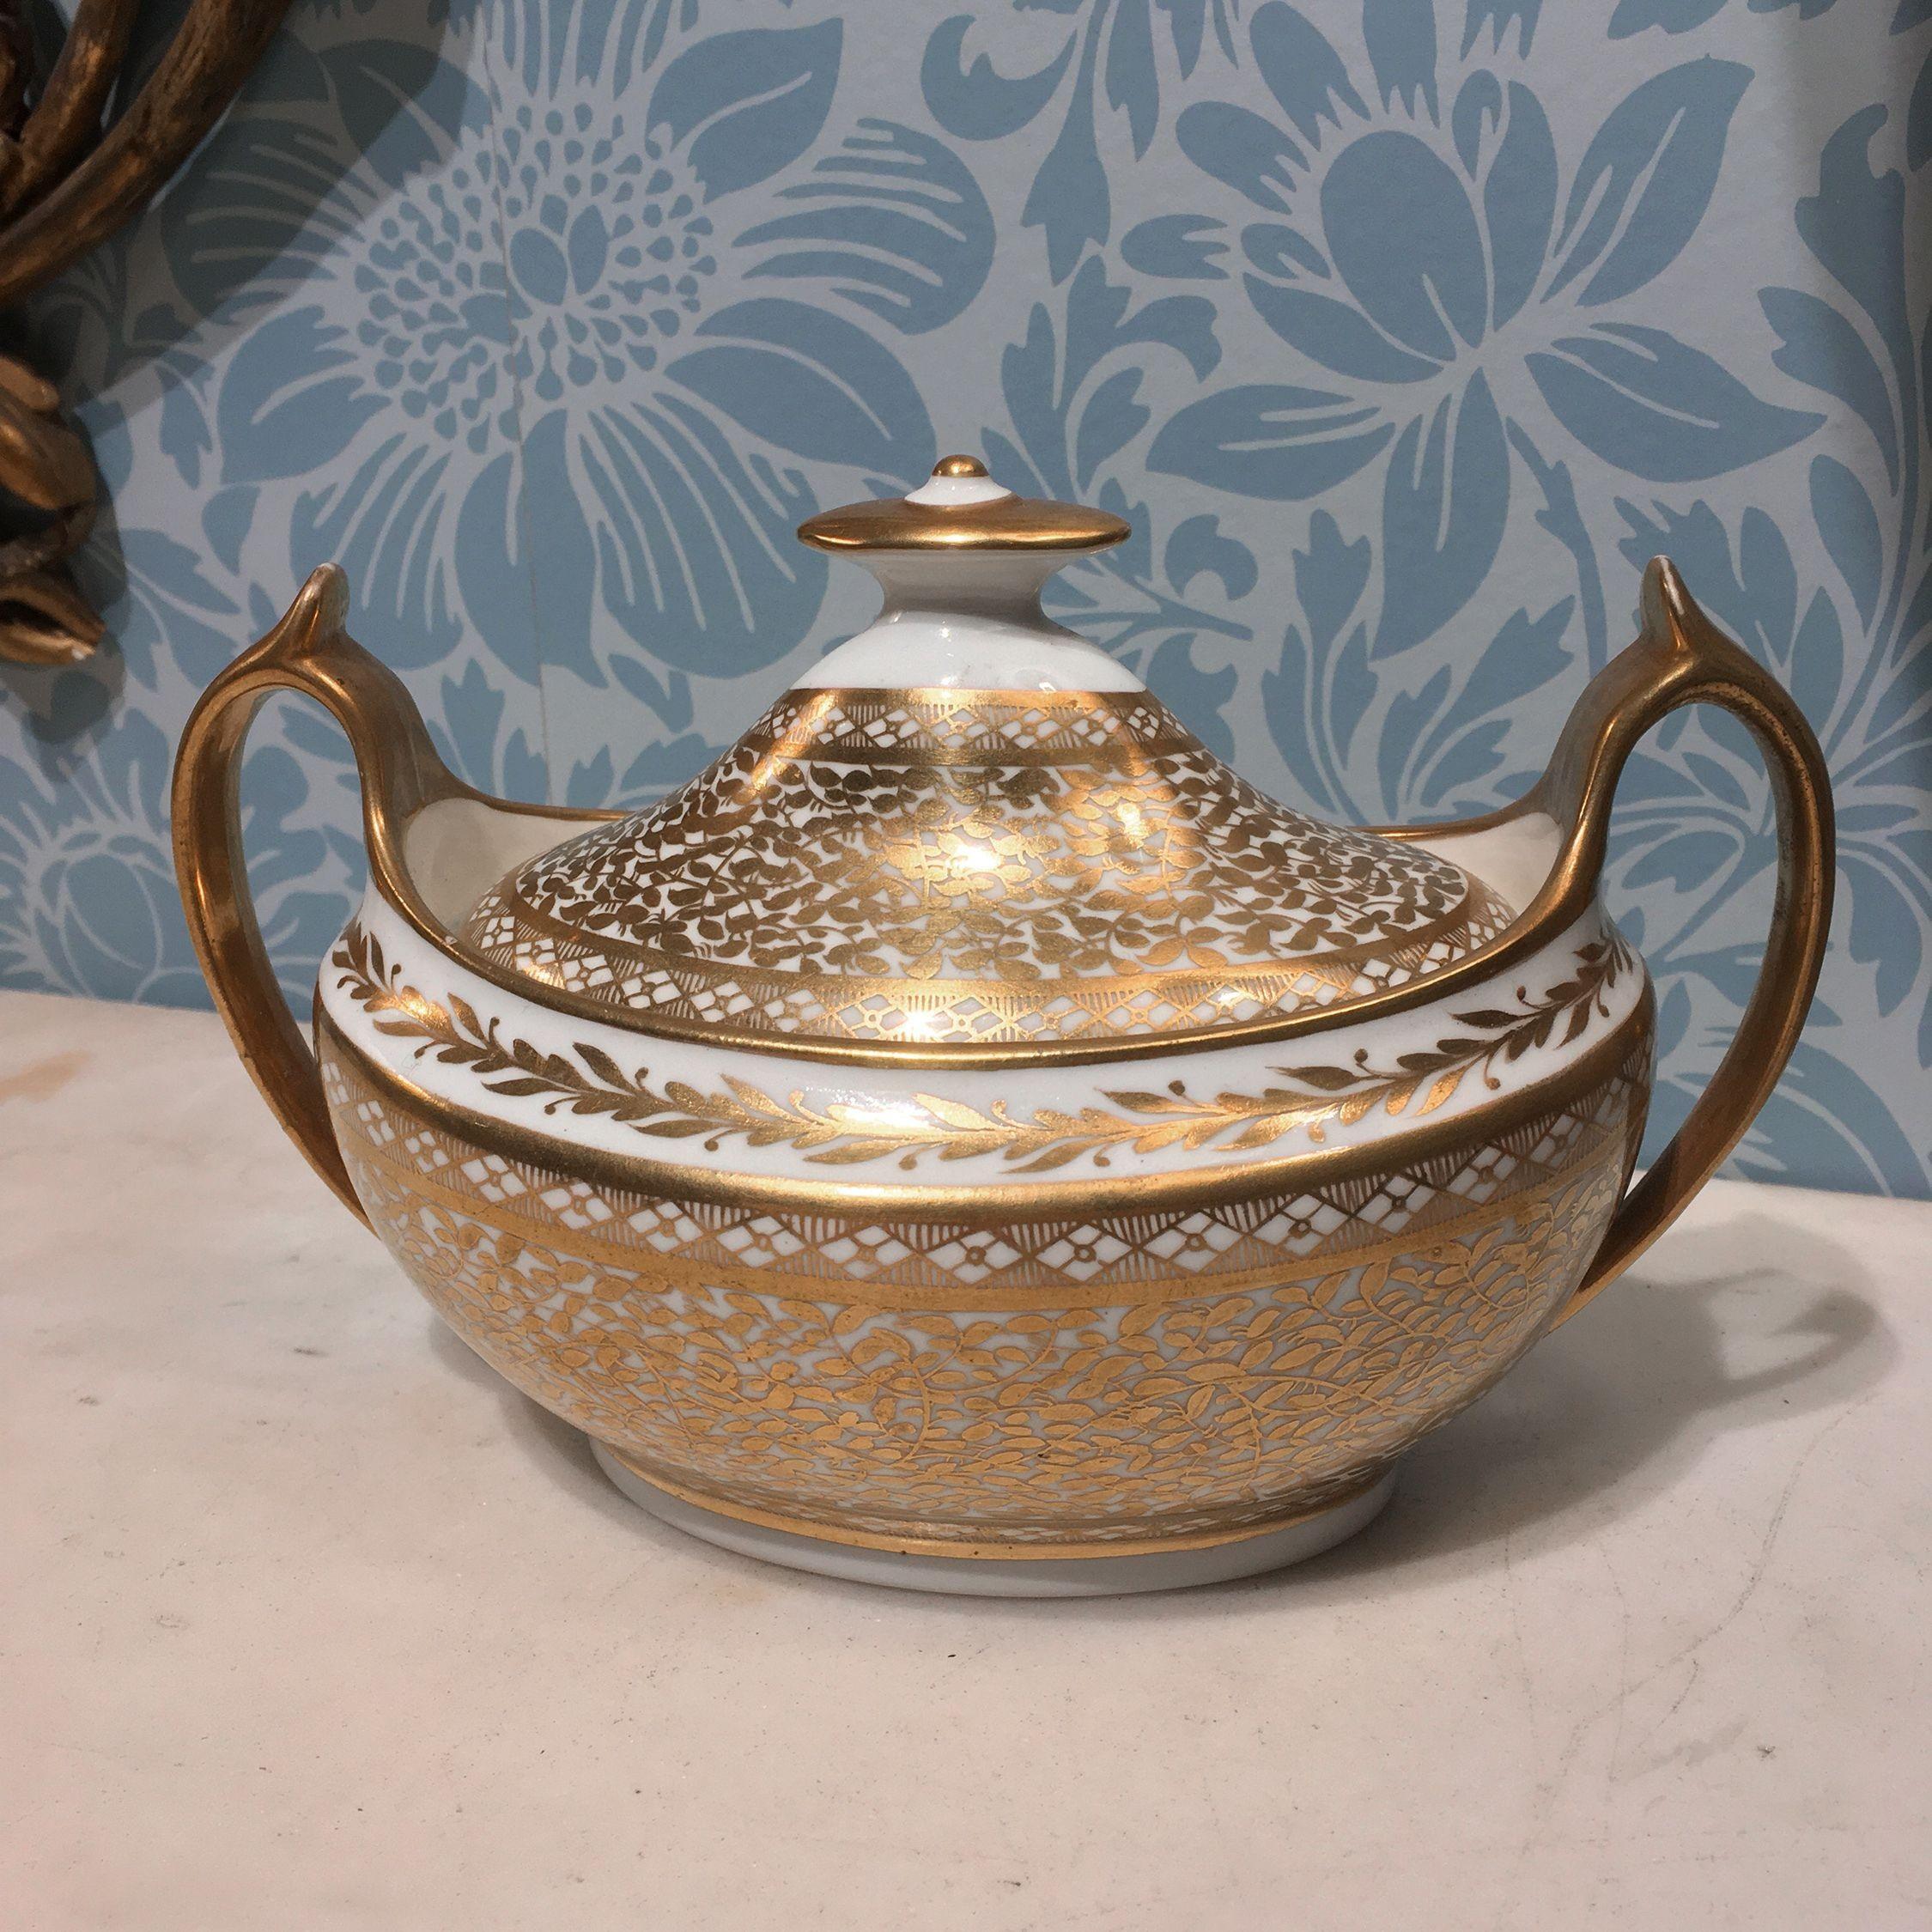 Spode double handled sugar bowl and cover. Oval-shaped porcelain body, gilt with diamond and vine motifs, the base impressed with an “S” and numbered “609”.